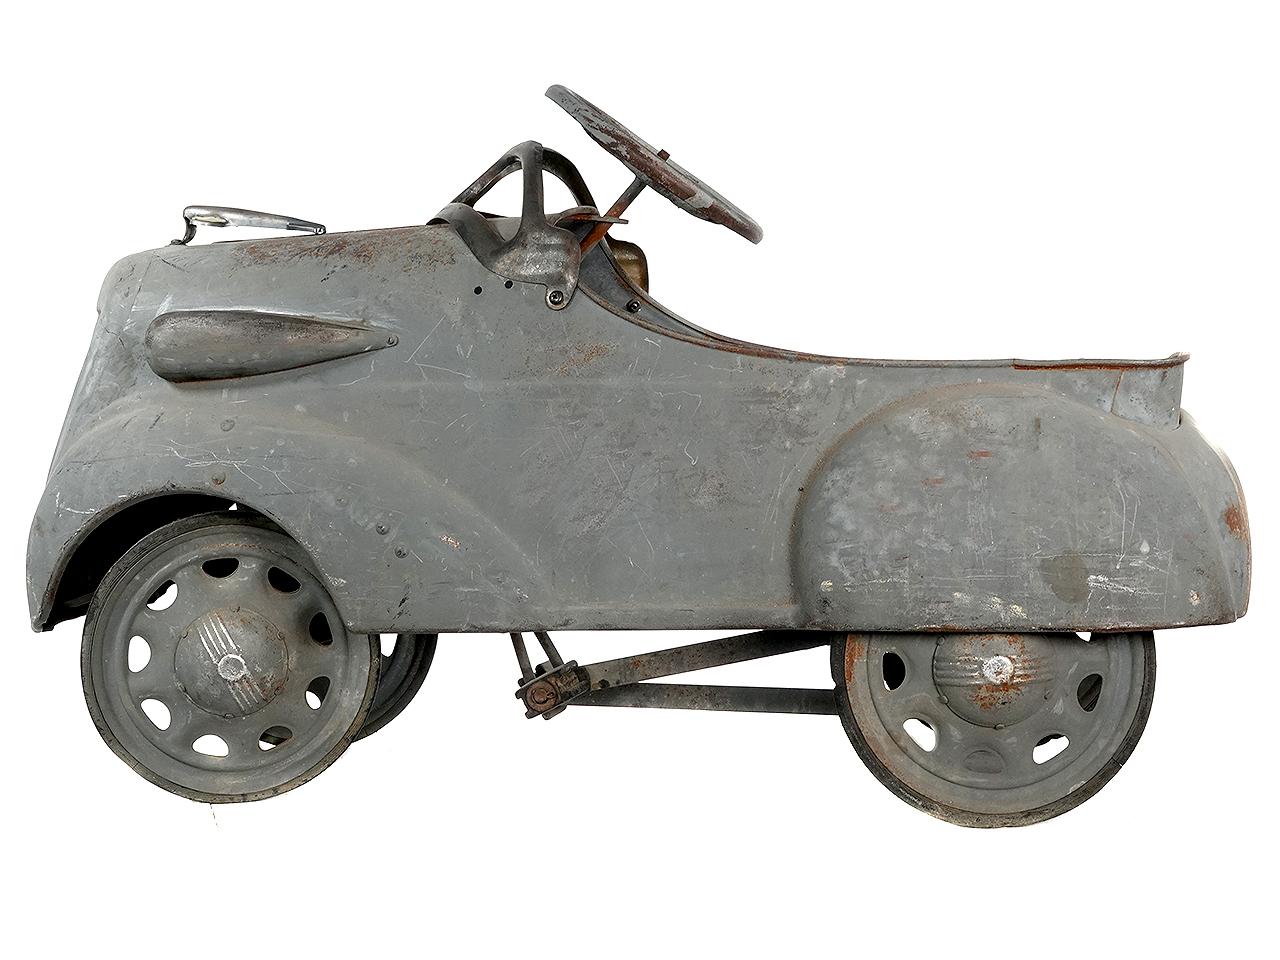 This is a very hard to find 1936 Steelcraft Ford V8 pedal car sedan coupe roadster. The car has a nice weathered patina with just the right look.